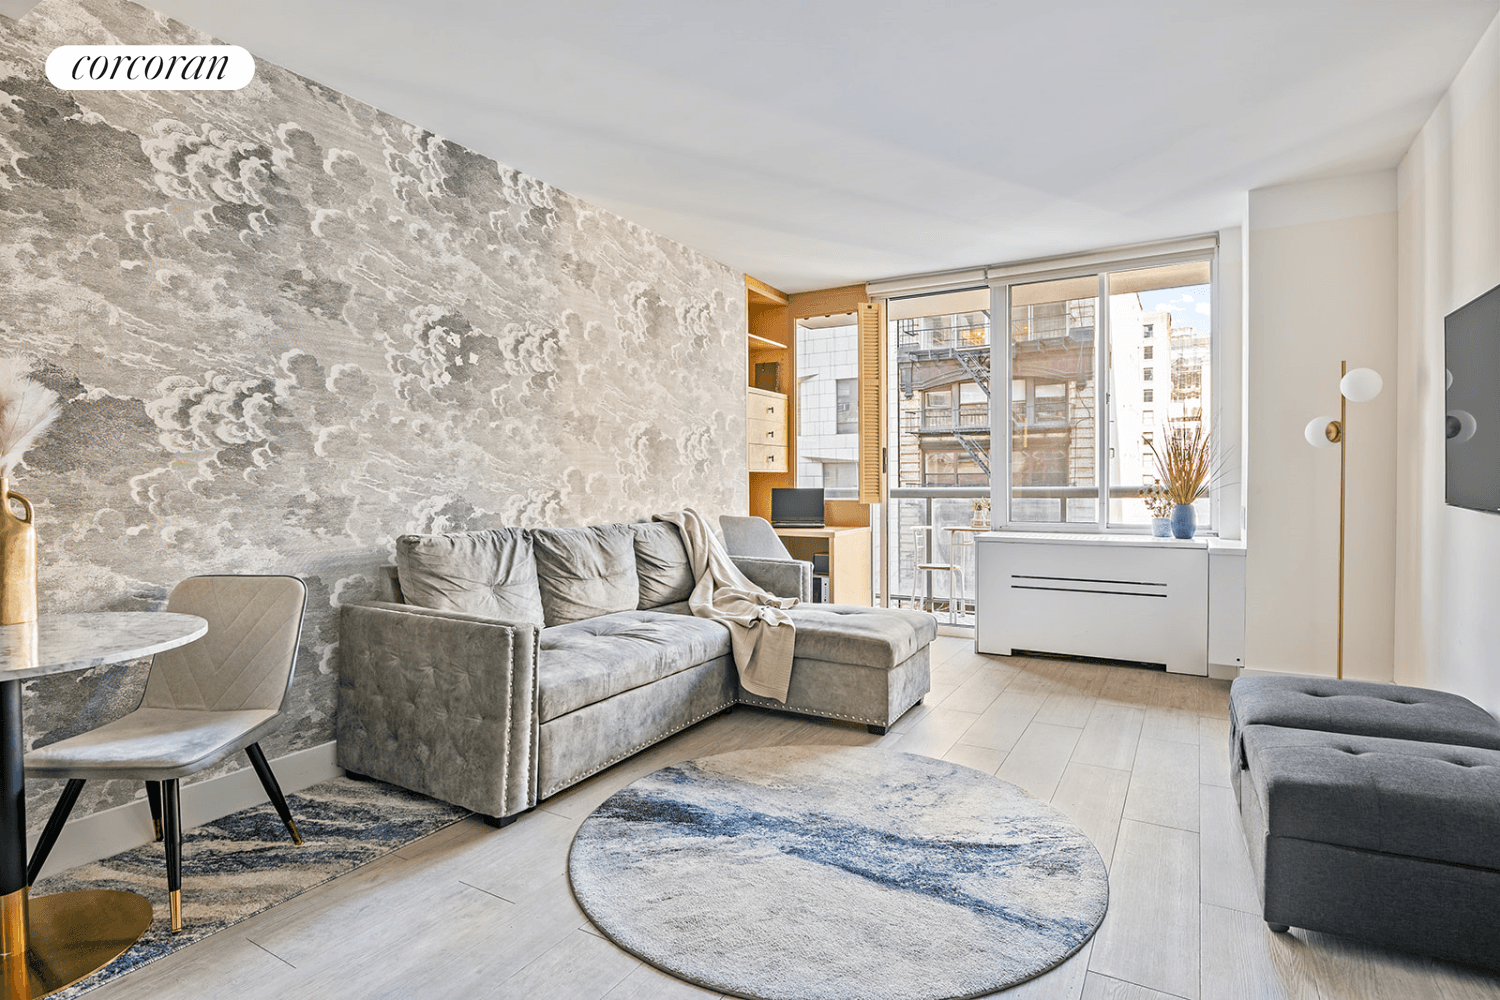 Discover apartment 6E at 22 West 15th Street at Grosvenor House, an iconic DOWNTOWN Condominium in the heart of NYC's dynamic FLATIRON neighborhood.